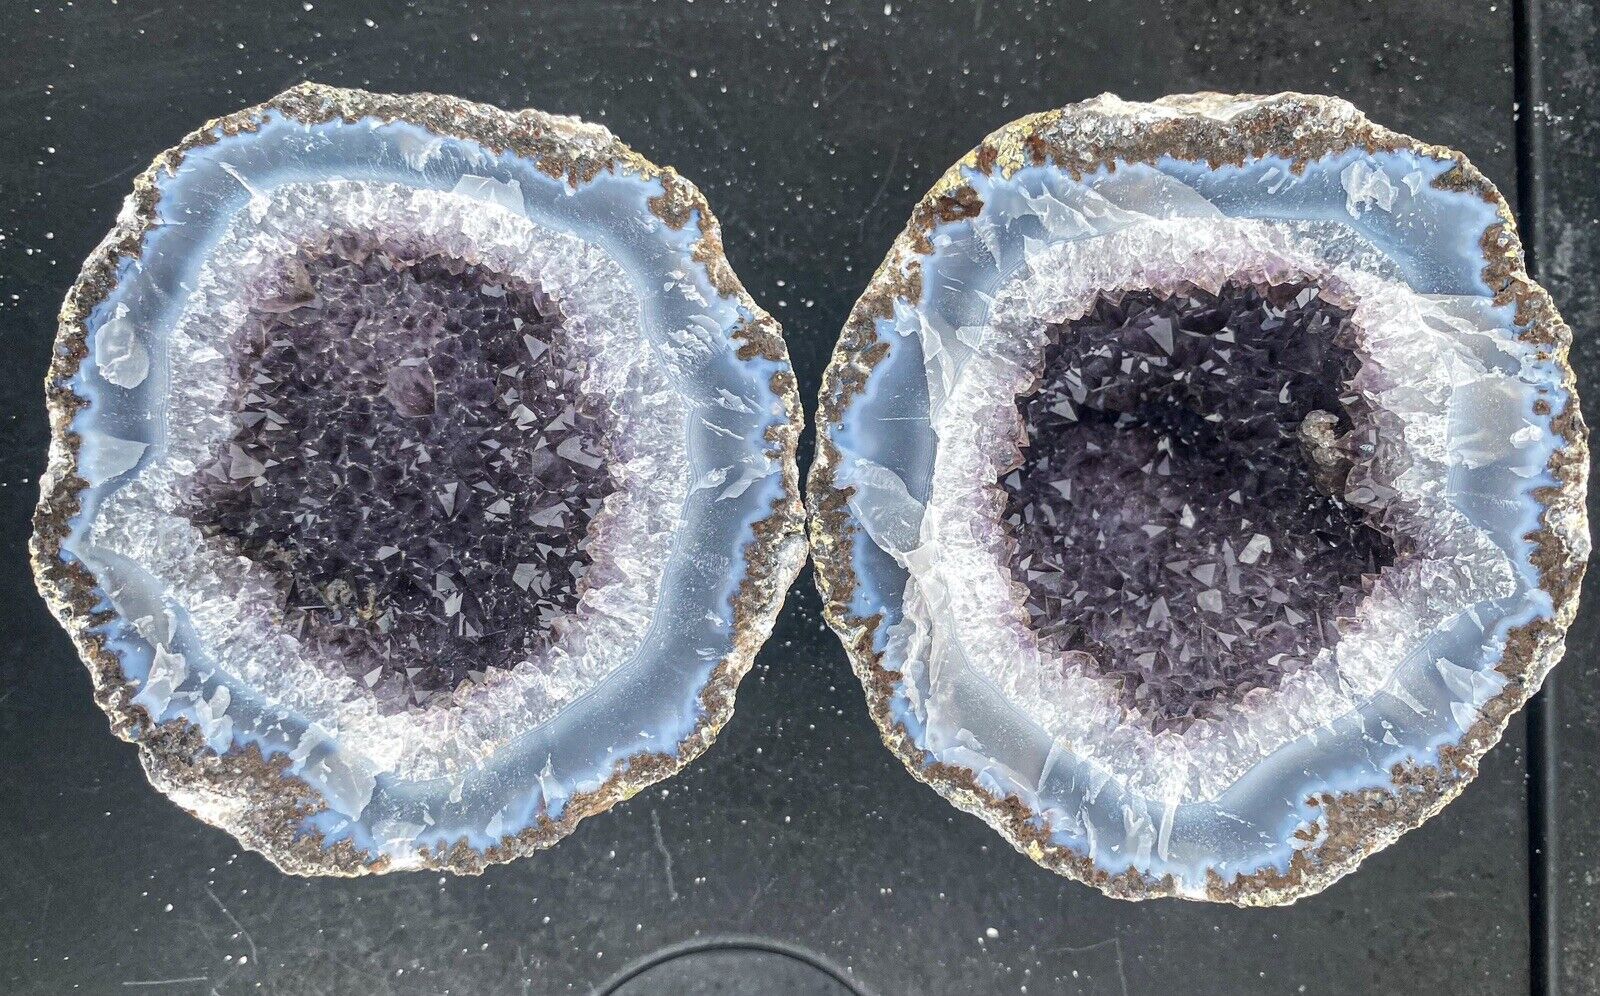 Lace Agate With Calcite On Amethyst Geode From Las Choyas, Chihuahua, Mexico 